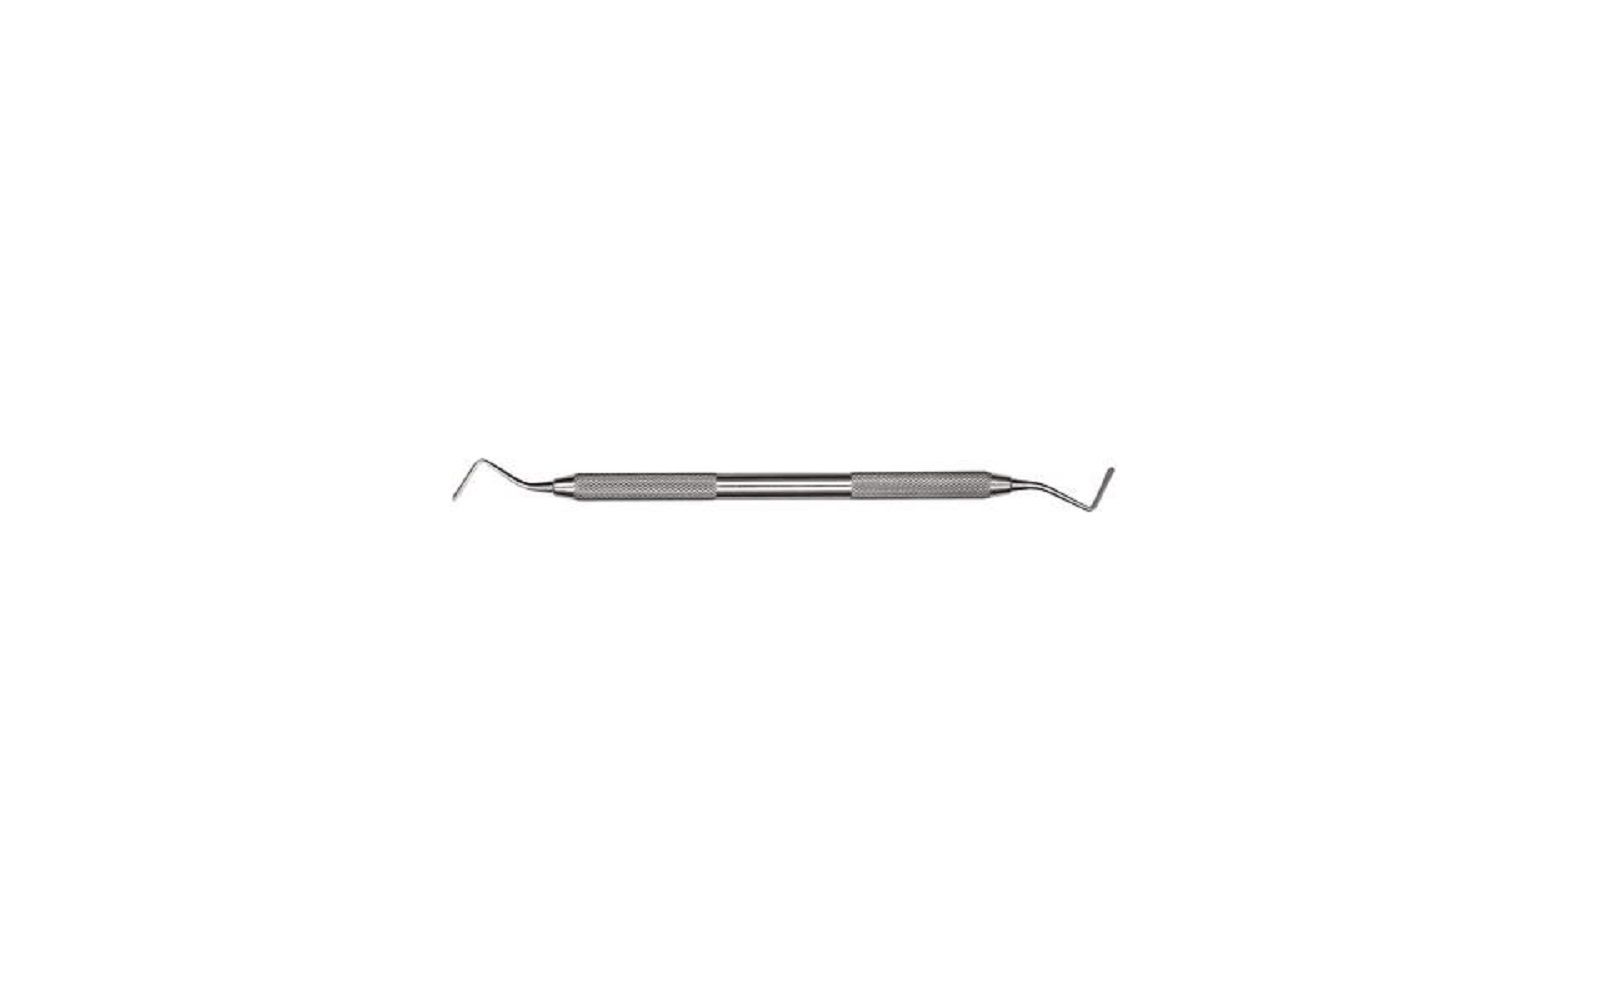 Cord packing instruments – 113 yardley, non-serrated, double end